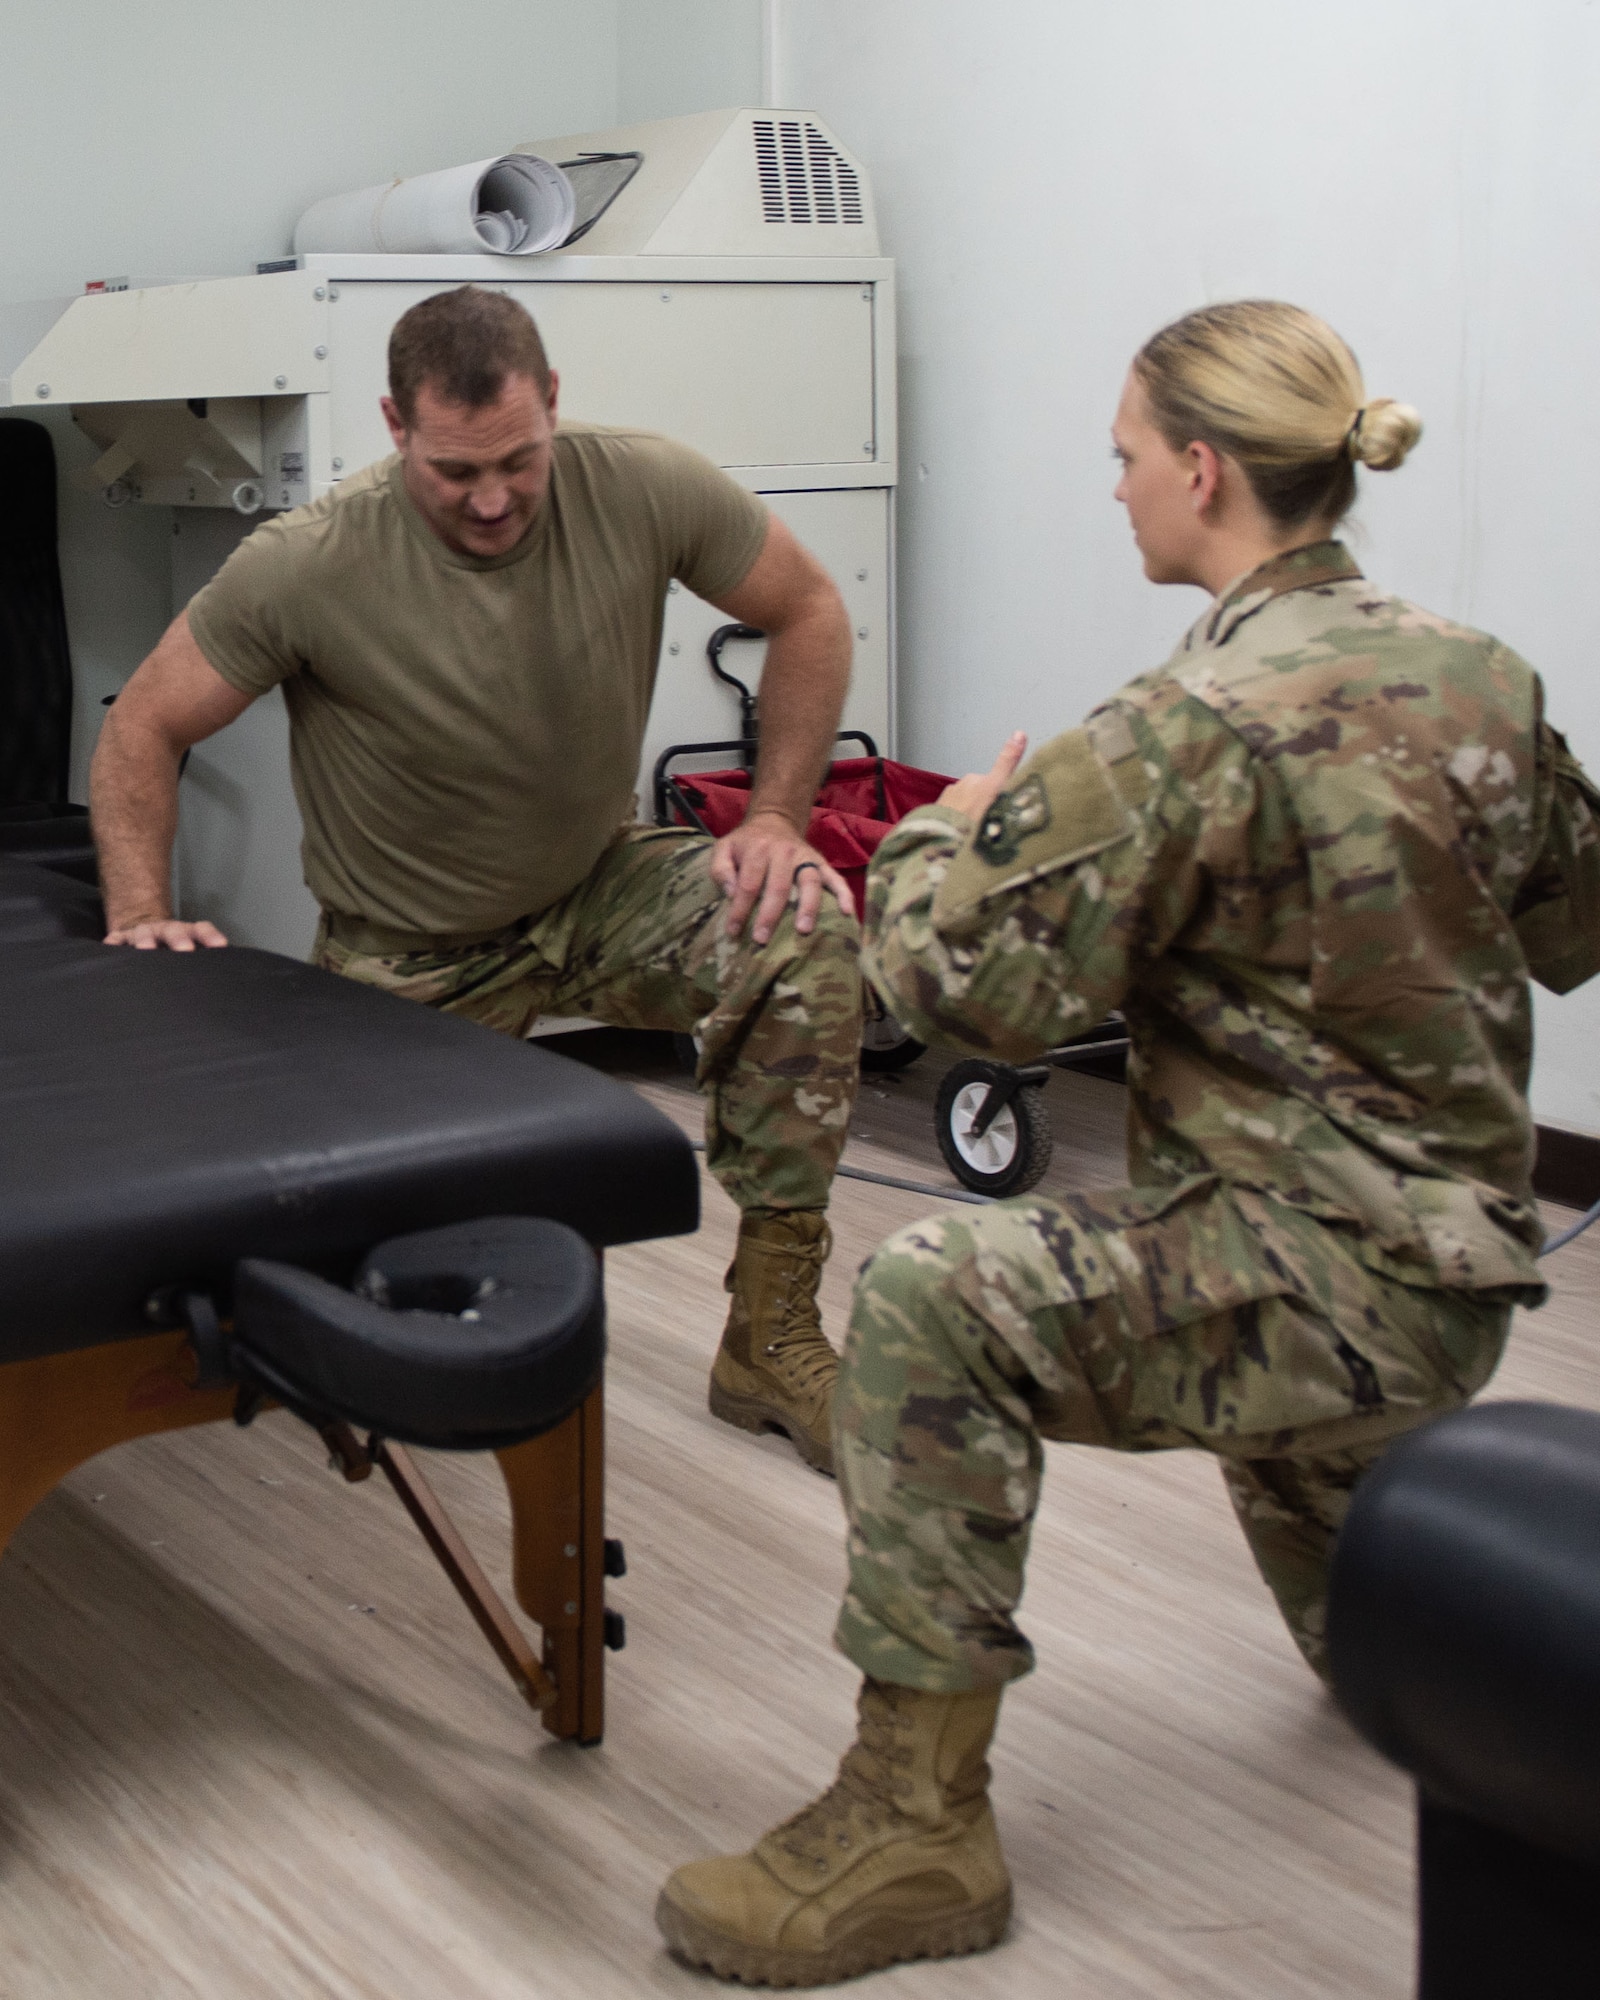 Senior Airman Tanita Frayne, right, 380th Expeditionary Medical Group physical therapist technician, demonstrates a mobility exercise for a patient May 17, 2019 at Al Dhafra Air Base, United Arab Emirates. After a treatment the technician educates the patient on mobility exercises to strengthen the problem area and prevent future injuries. (U.S. Air Force photo by Staff Sgt. Chris Thornbury)